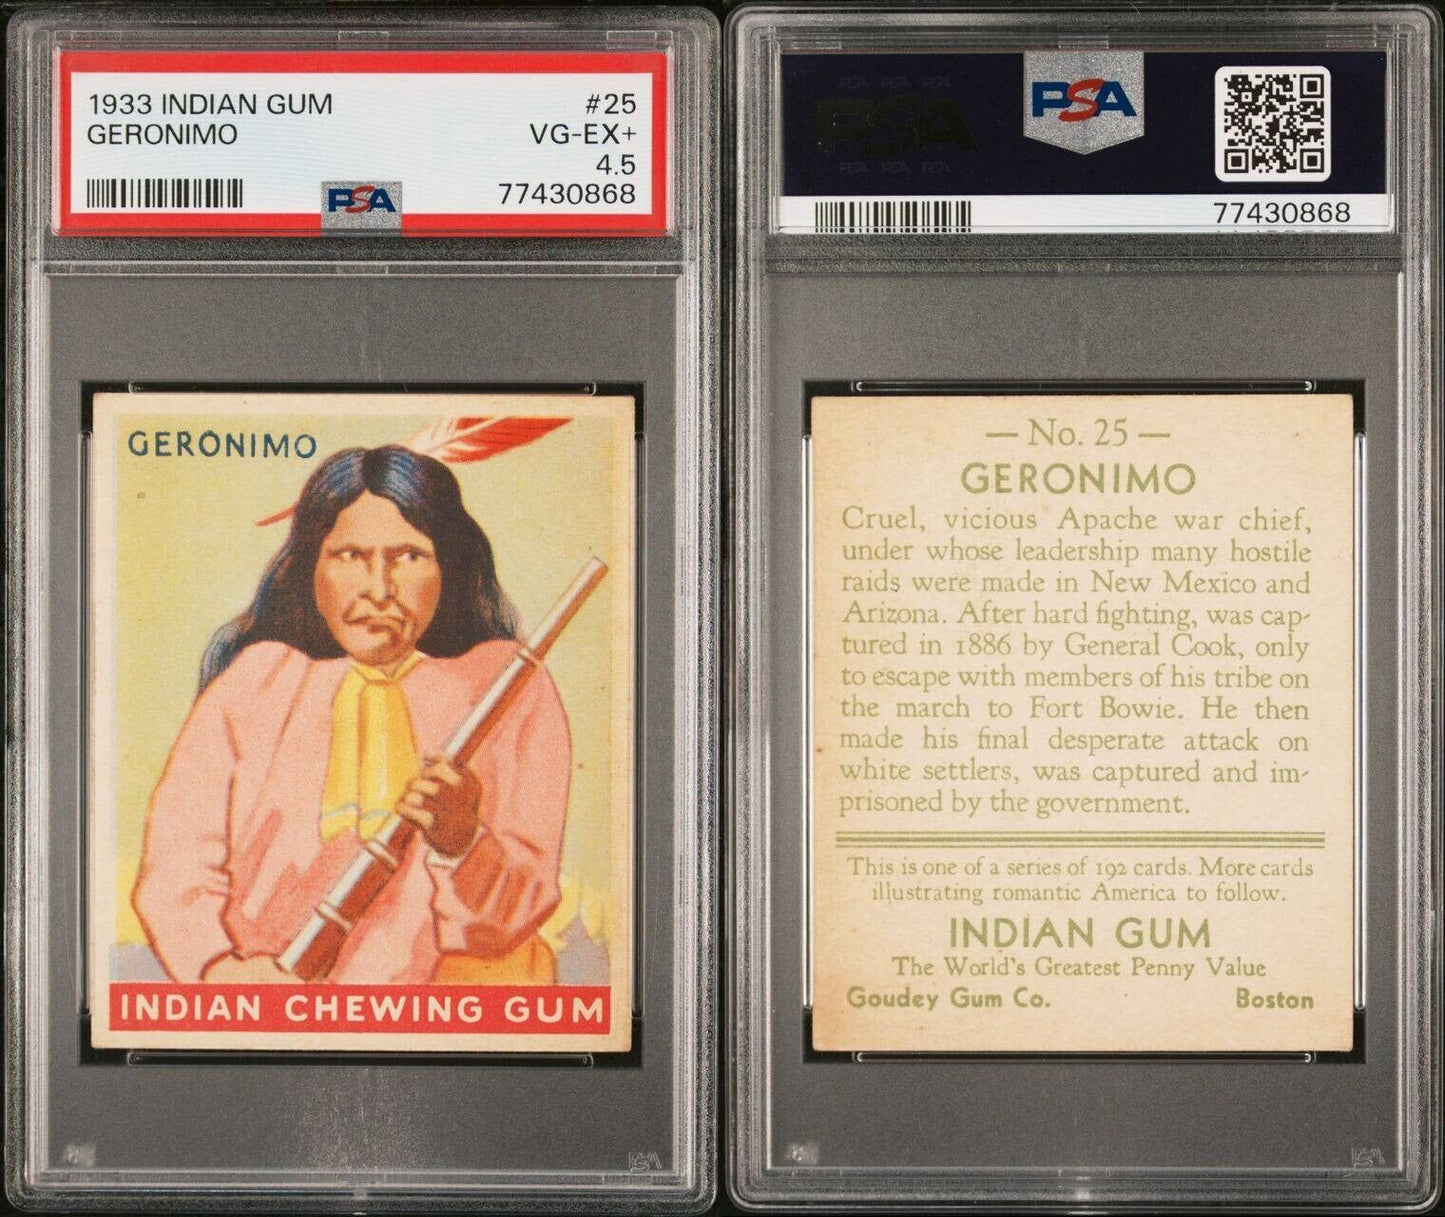 1933 Goudey Indian Gum #25 Geronimo Series 192 “More Cards” (PSA 4.5 VG/EX+)